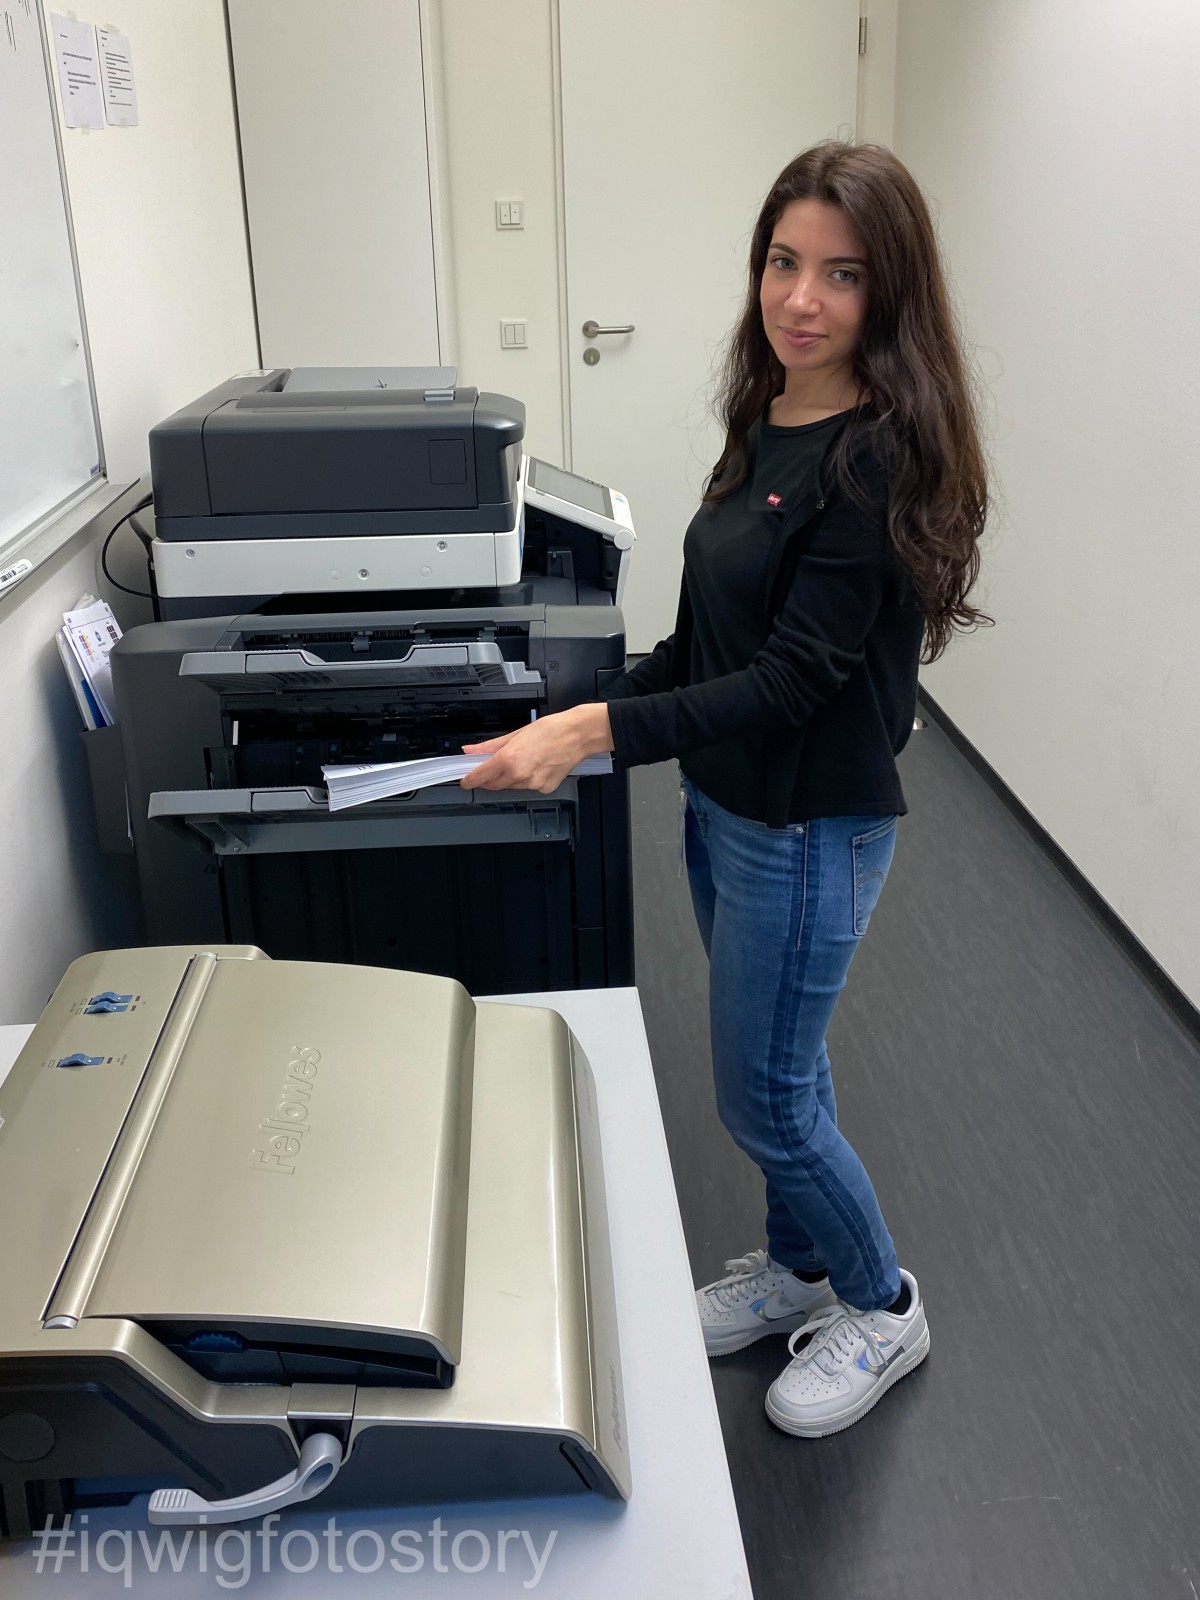 A woman is taking a stack of documents out of a printer and is smiling at the camera. She has long hair and is wearing a black top, blue jeans and white trainers.